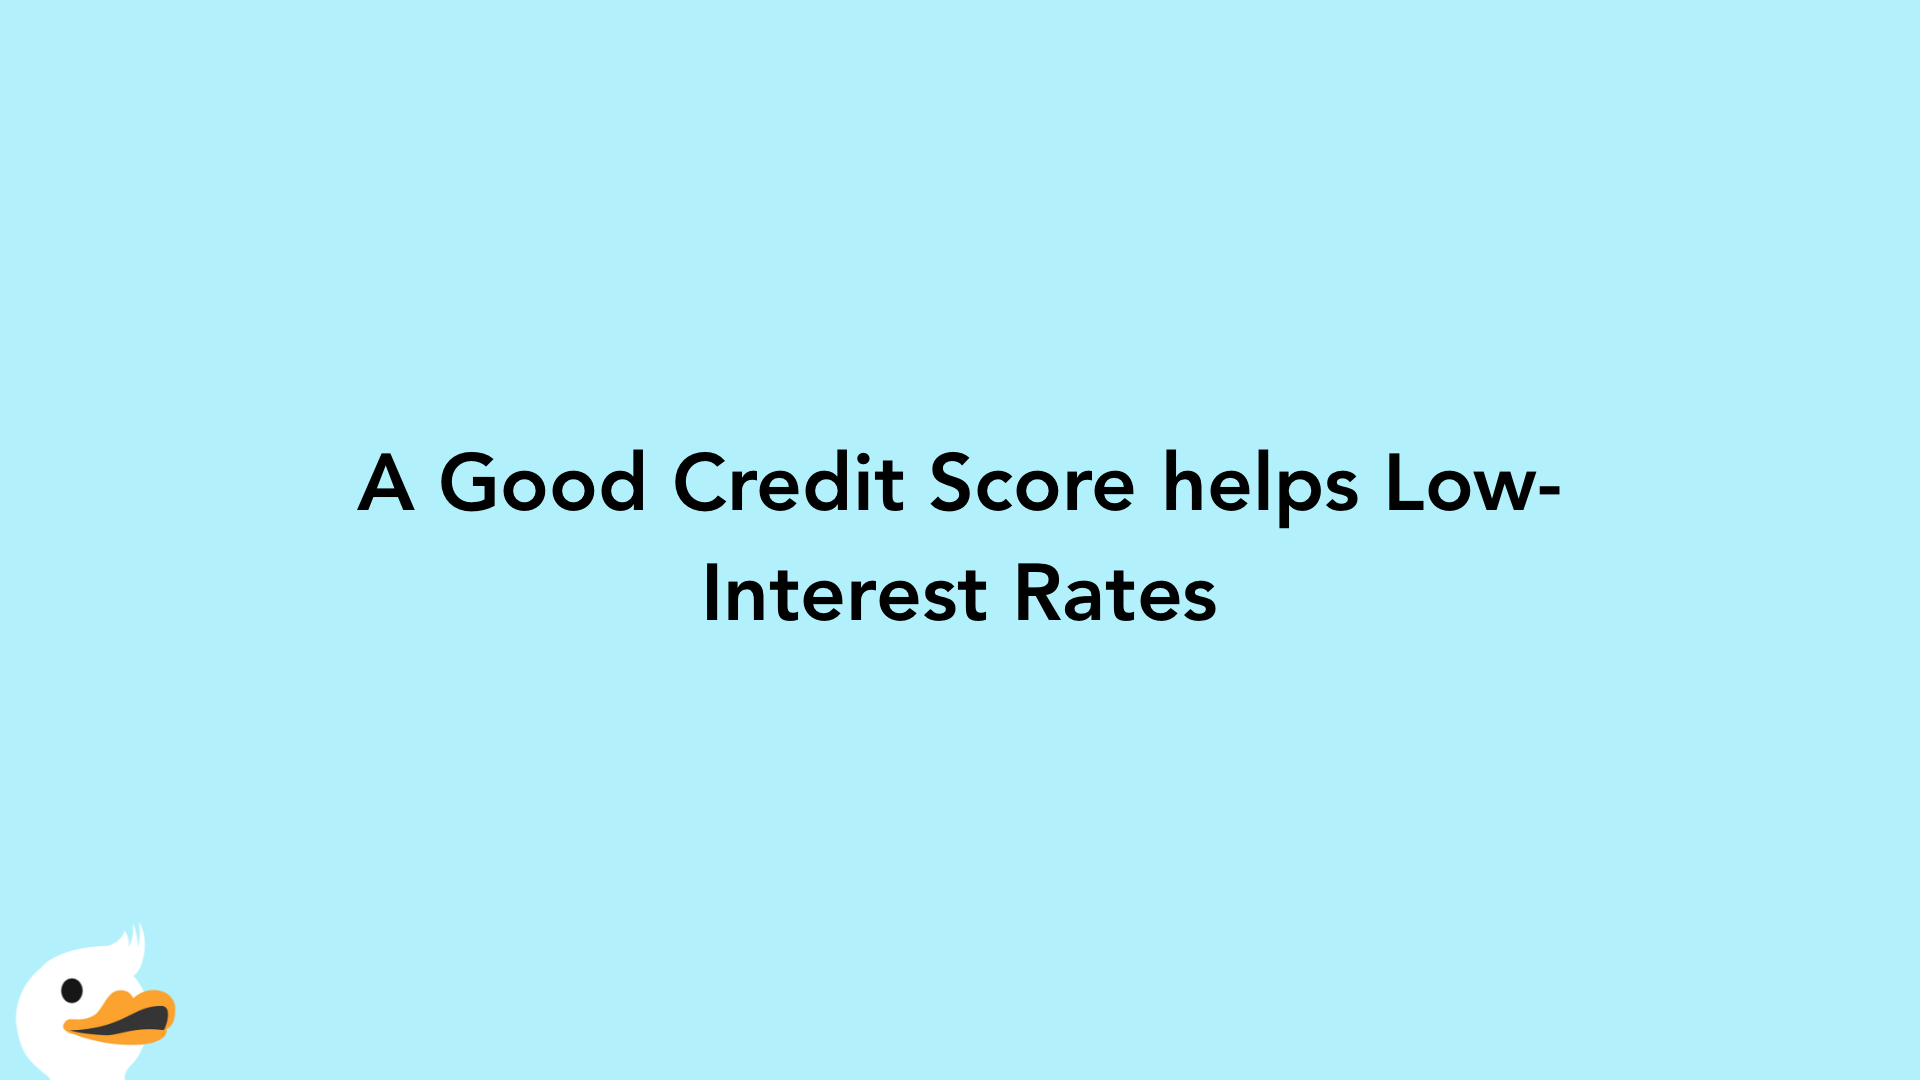 A Good Credit Score helps Low-Interest Rates